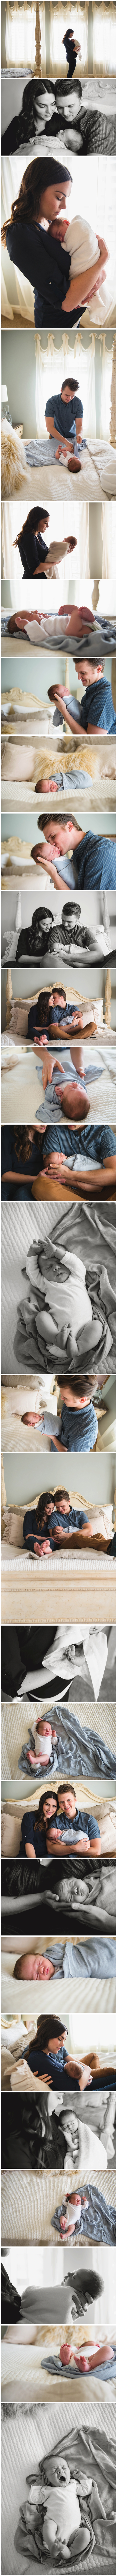 Love this in-home newborn/family photography session!